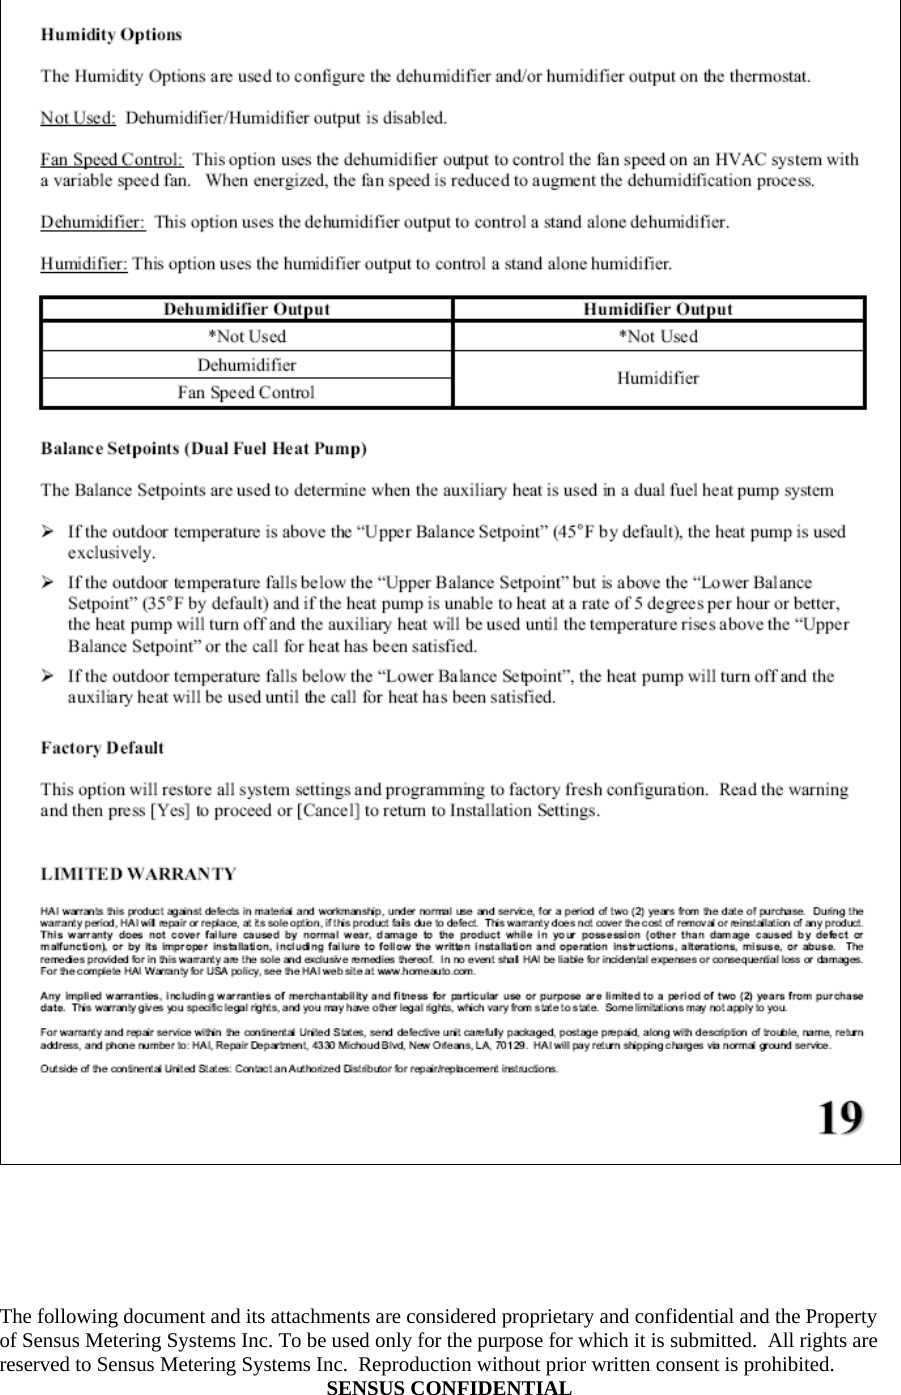  The following document and its attachments are considered proprietary and confidential and the Property of Sensus Metering Systems Inc. To be used only for the purpose for which it is submitted.  All rights are reserved to Sensus Metering Systems Inc.  Reproduction without prior written consent is prohibited. SENSUS CONFIDENTIAL   